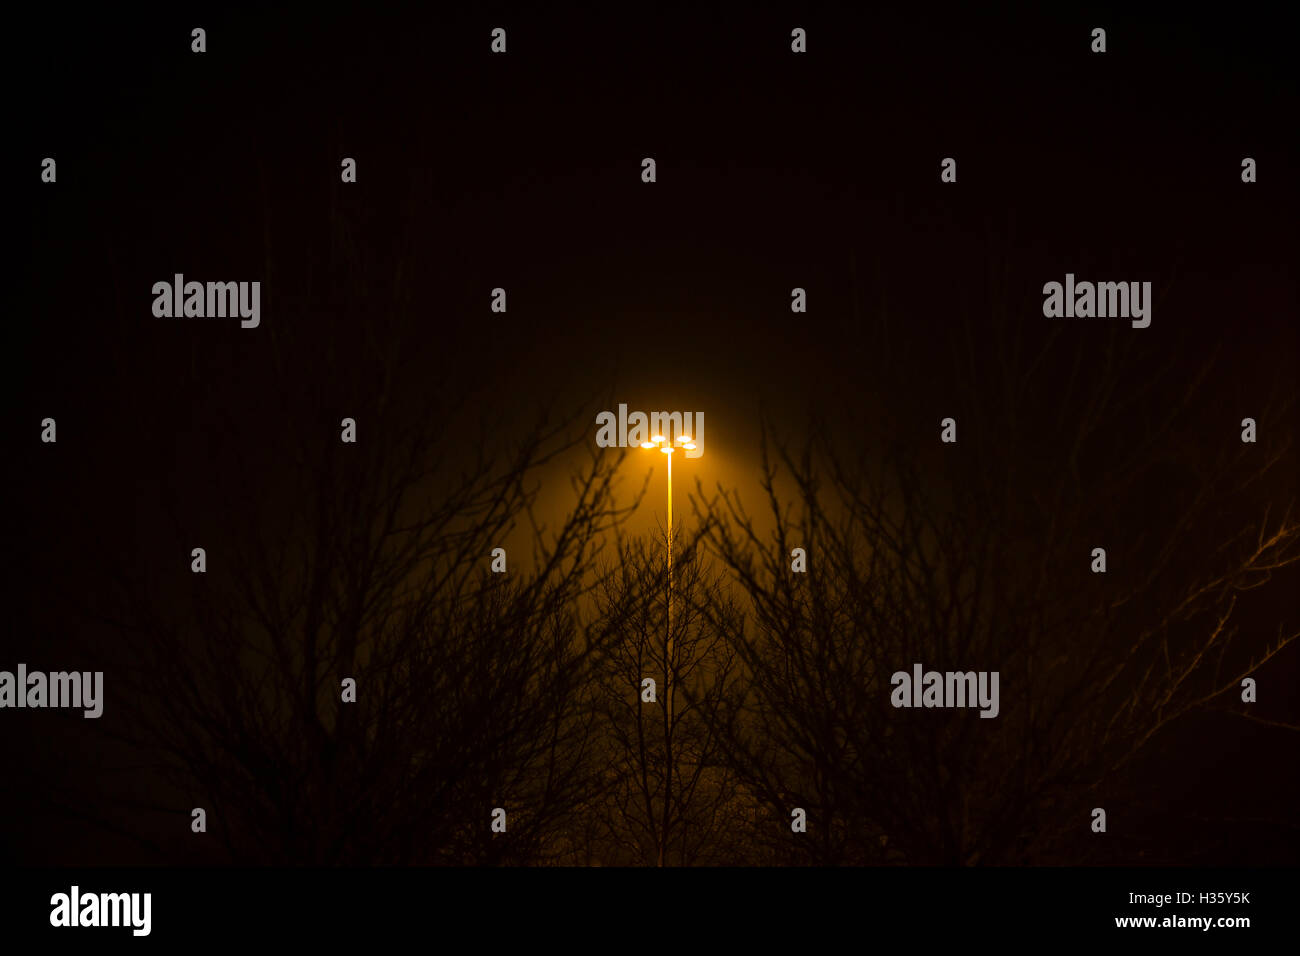 Outside Sodium Light High Resolution Stock Photography and Images - Alamy